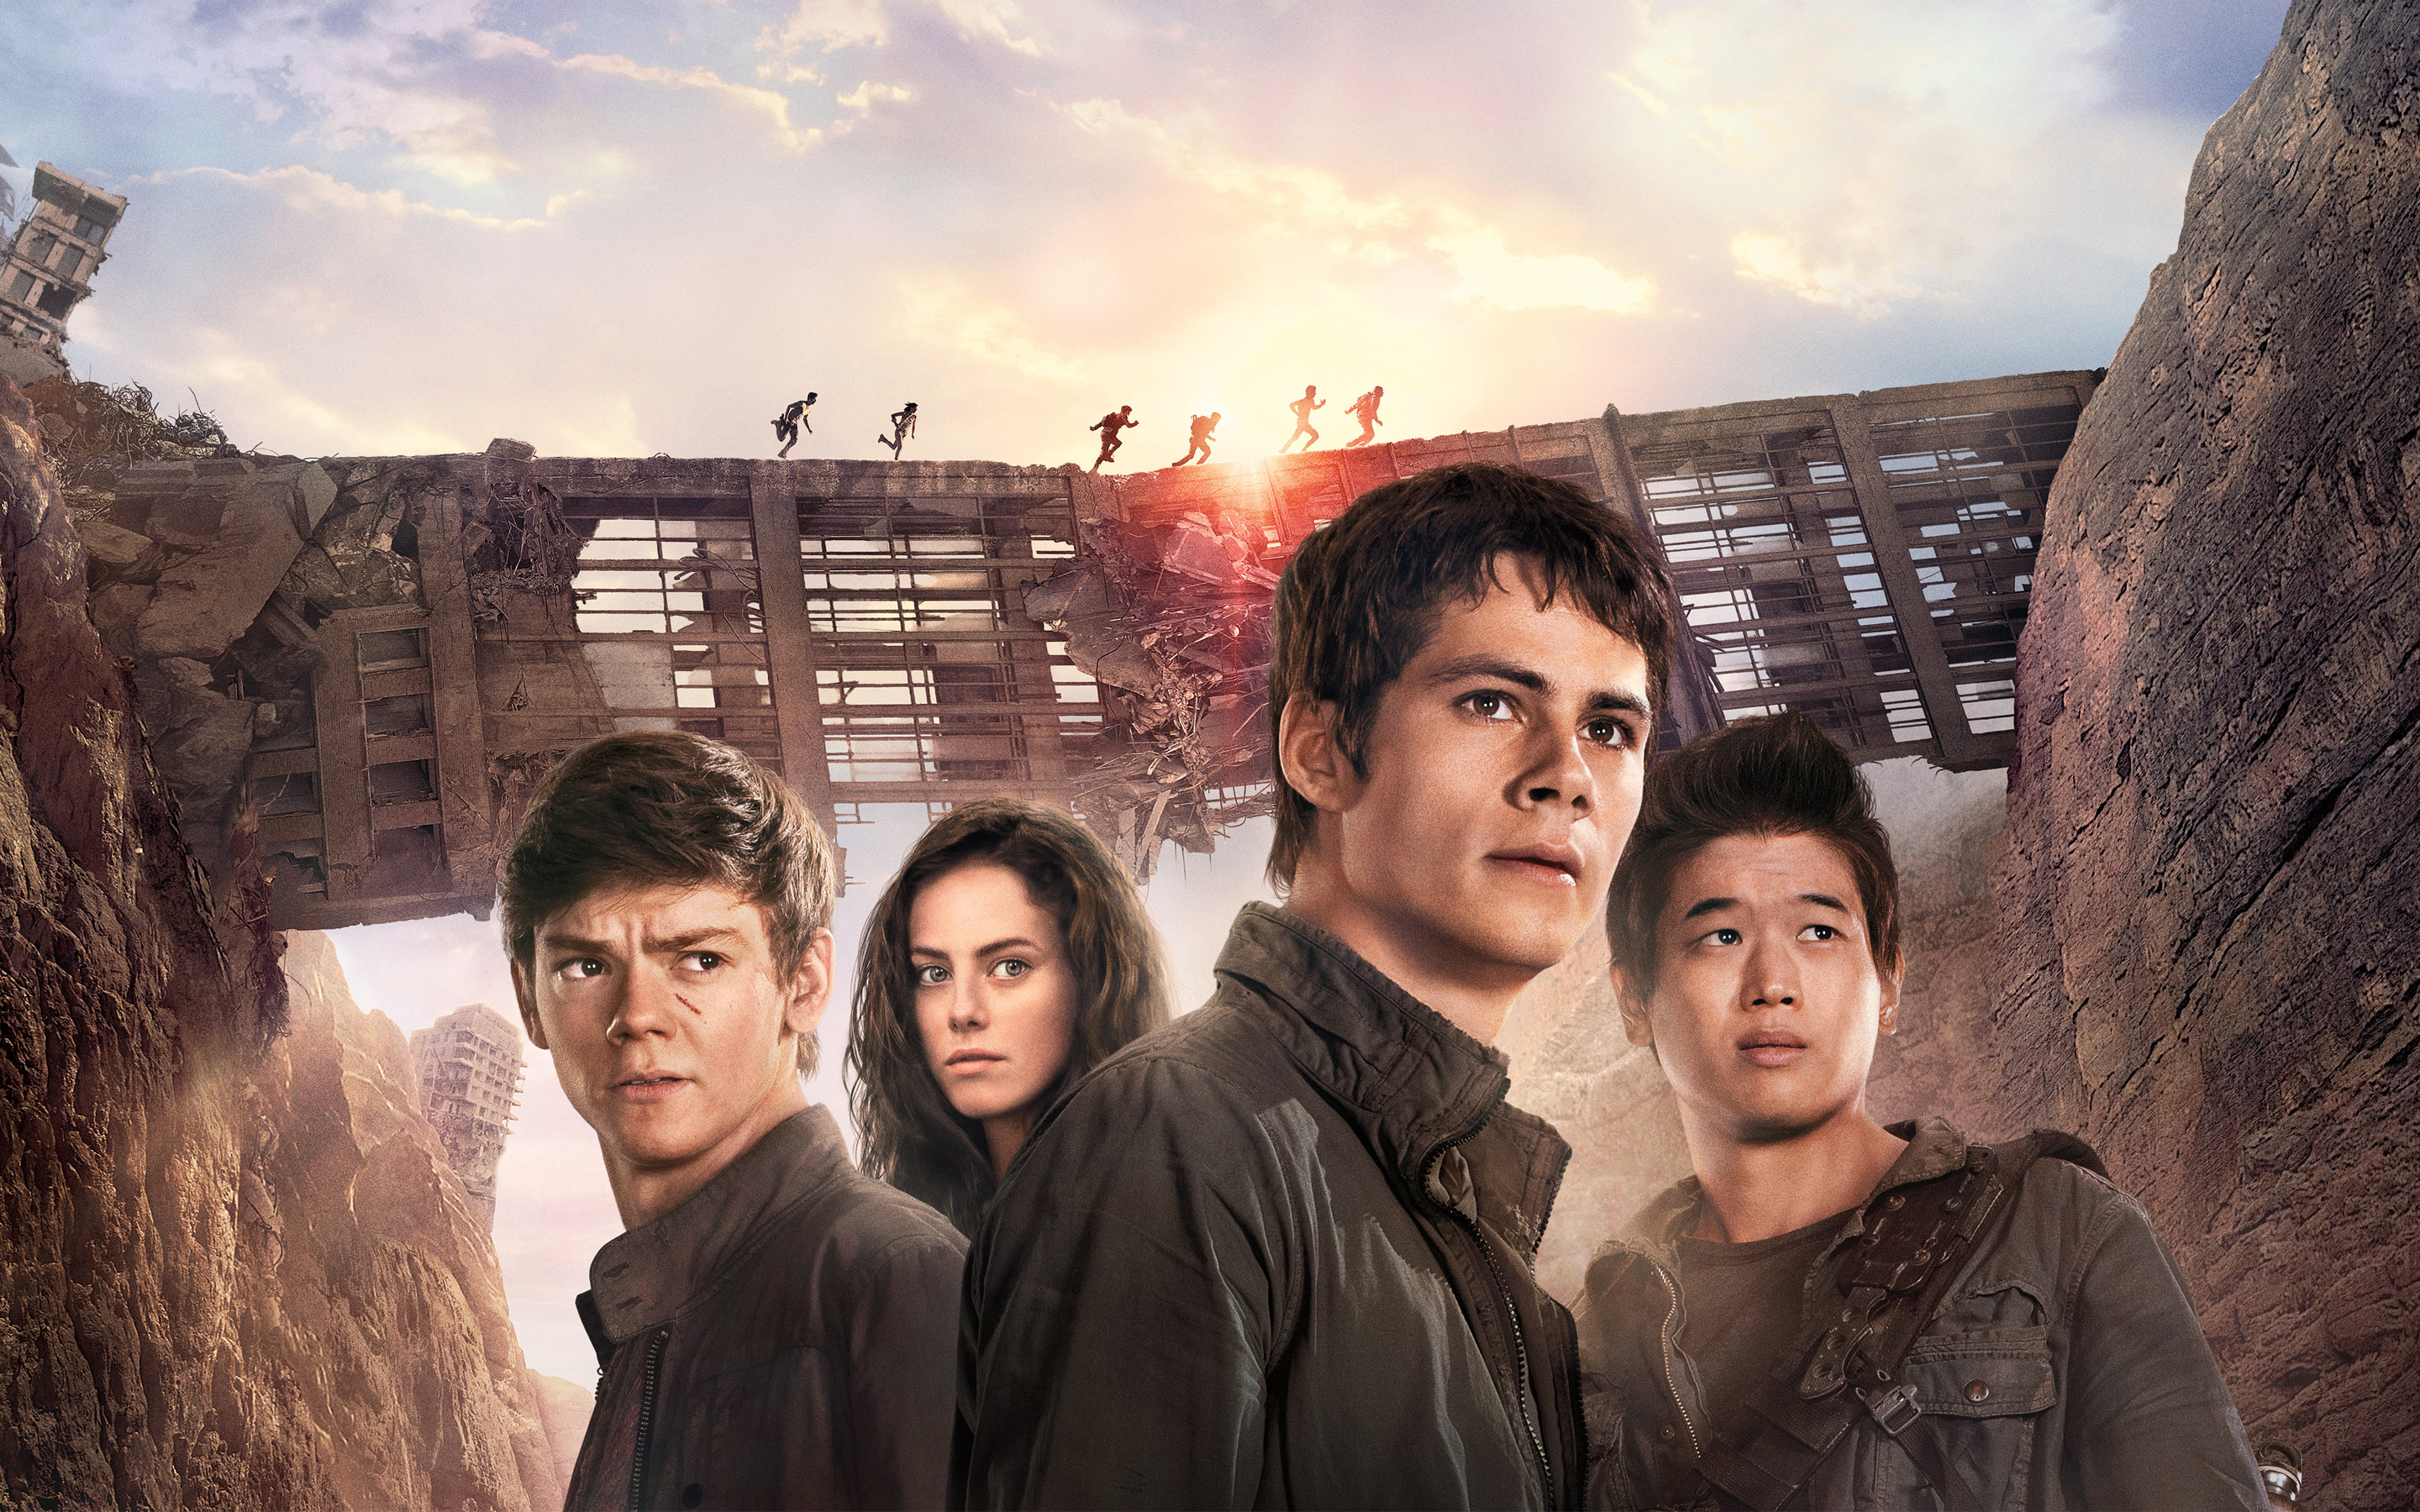 HQ Maze Runner: The Scorch Trials Wallpapers | File 2951.77Kb